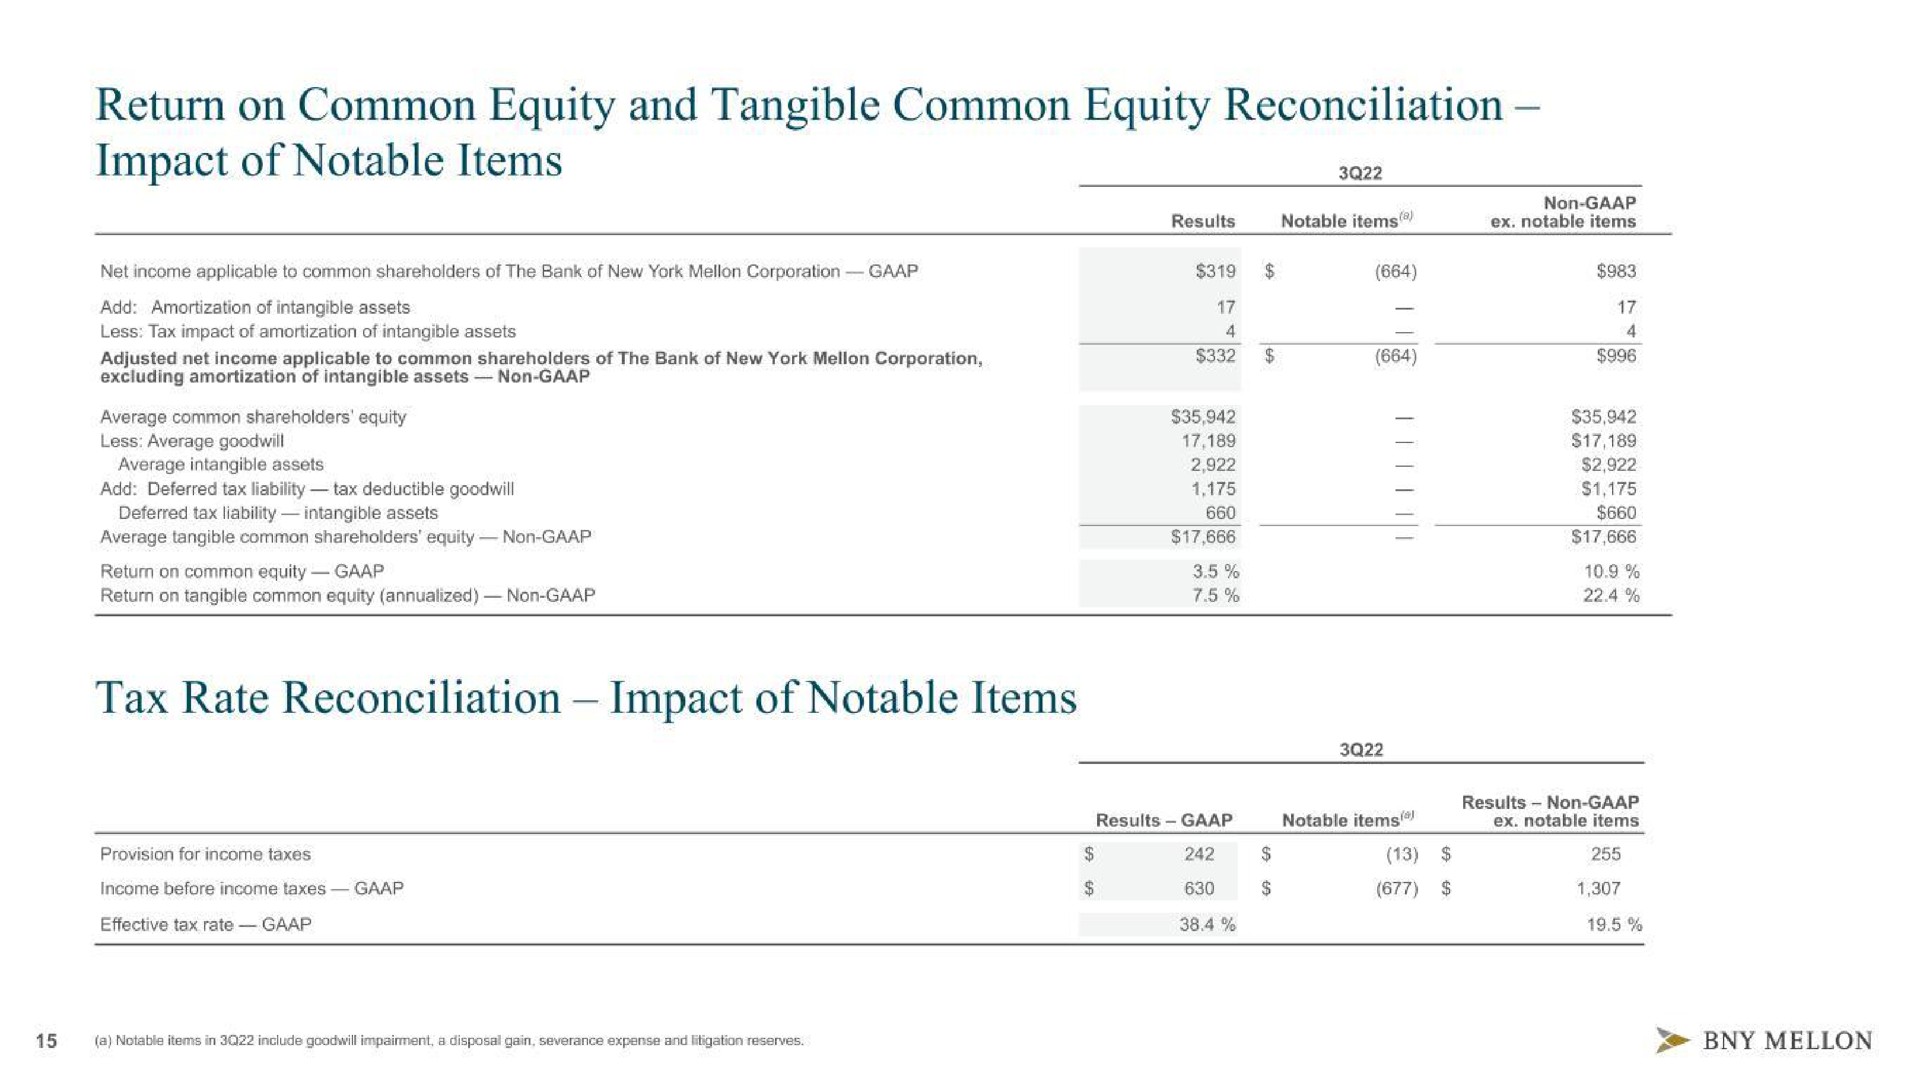 return on common equity and tangible common equity reconciliation impact of notable items tax rate reconciliation impact of notable items | BNY Mellon